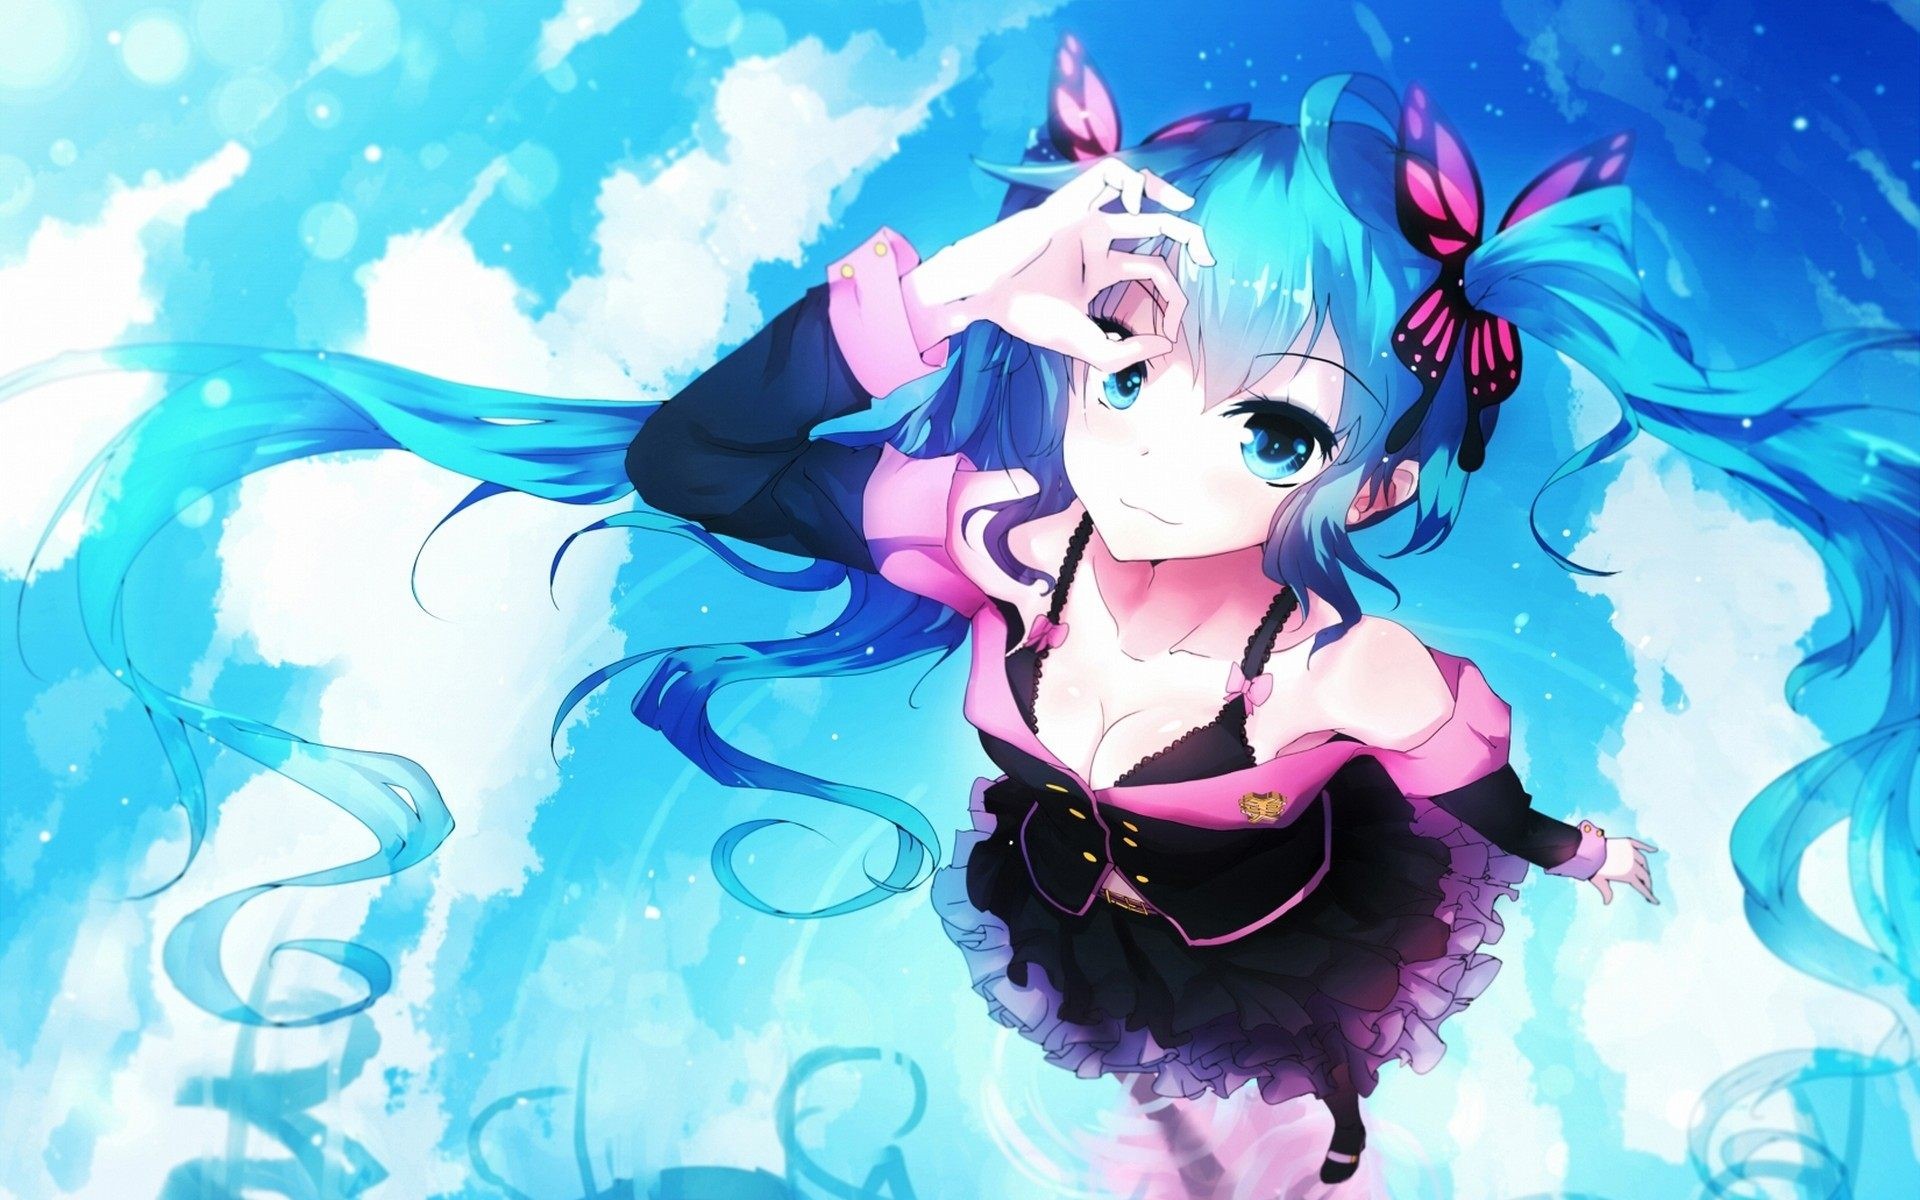 Anime Girls Wallpapers Hd Pictures One Hd Wallpaper - Anime Miku Wallpaper Hatsune Miku - HD Wallpaper 